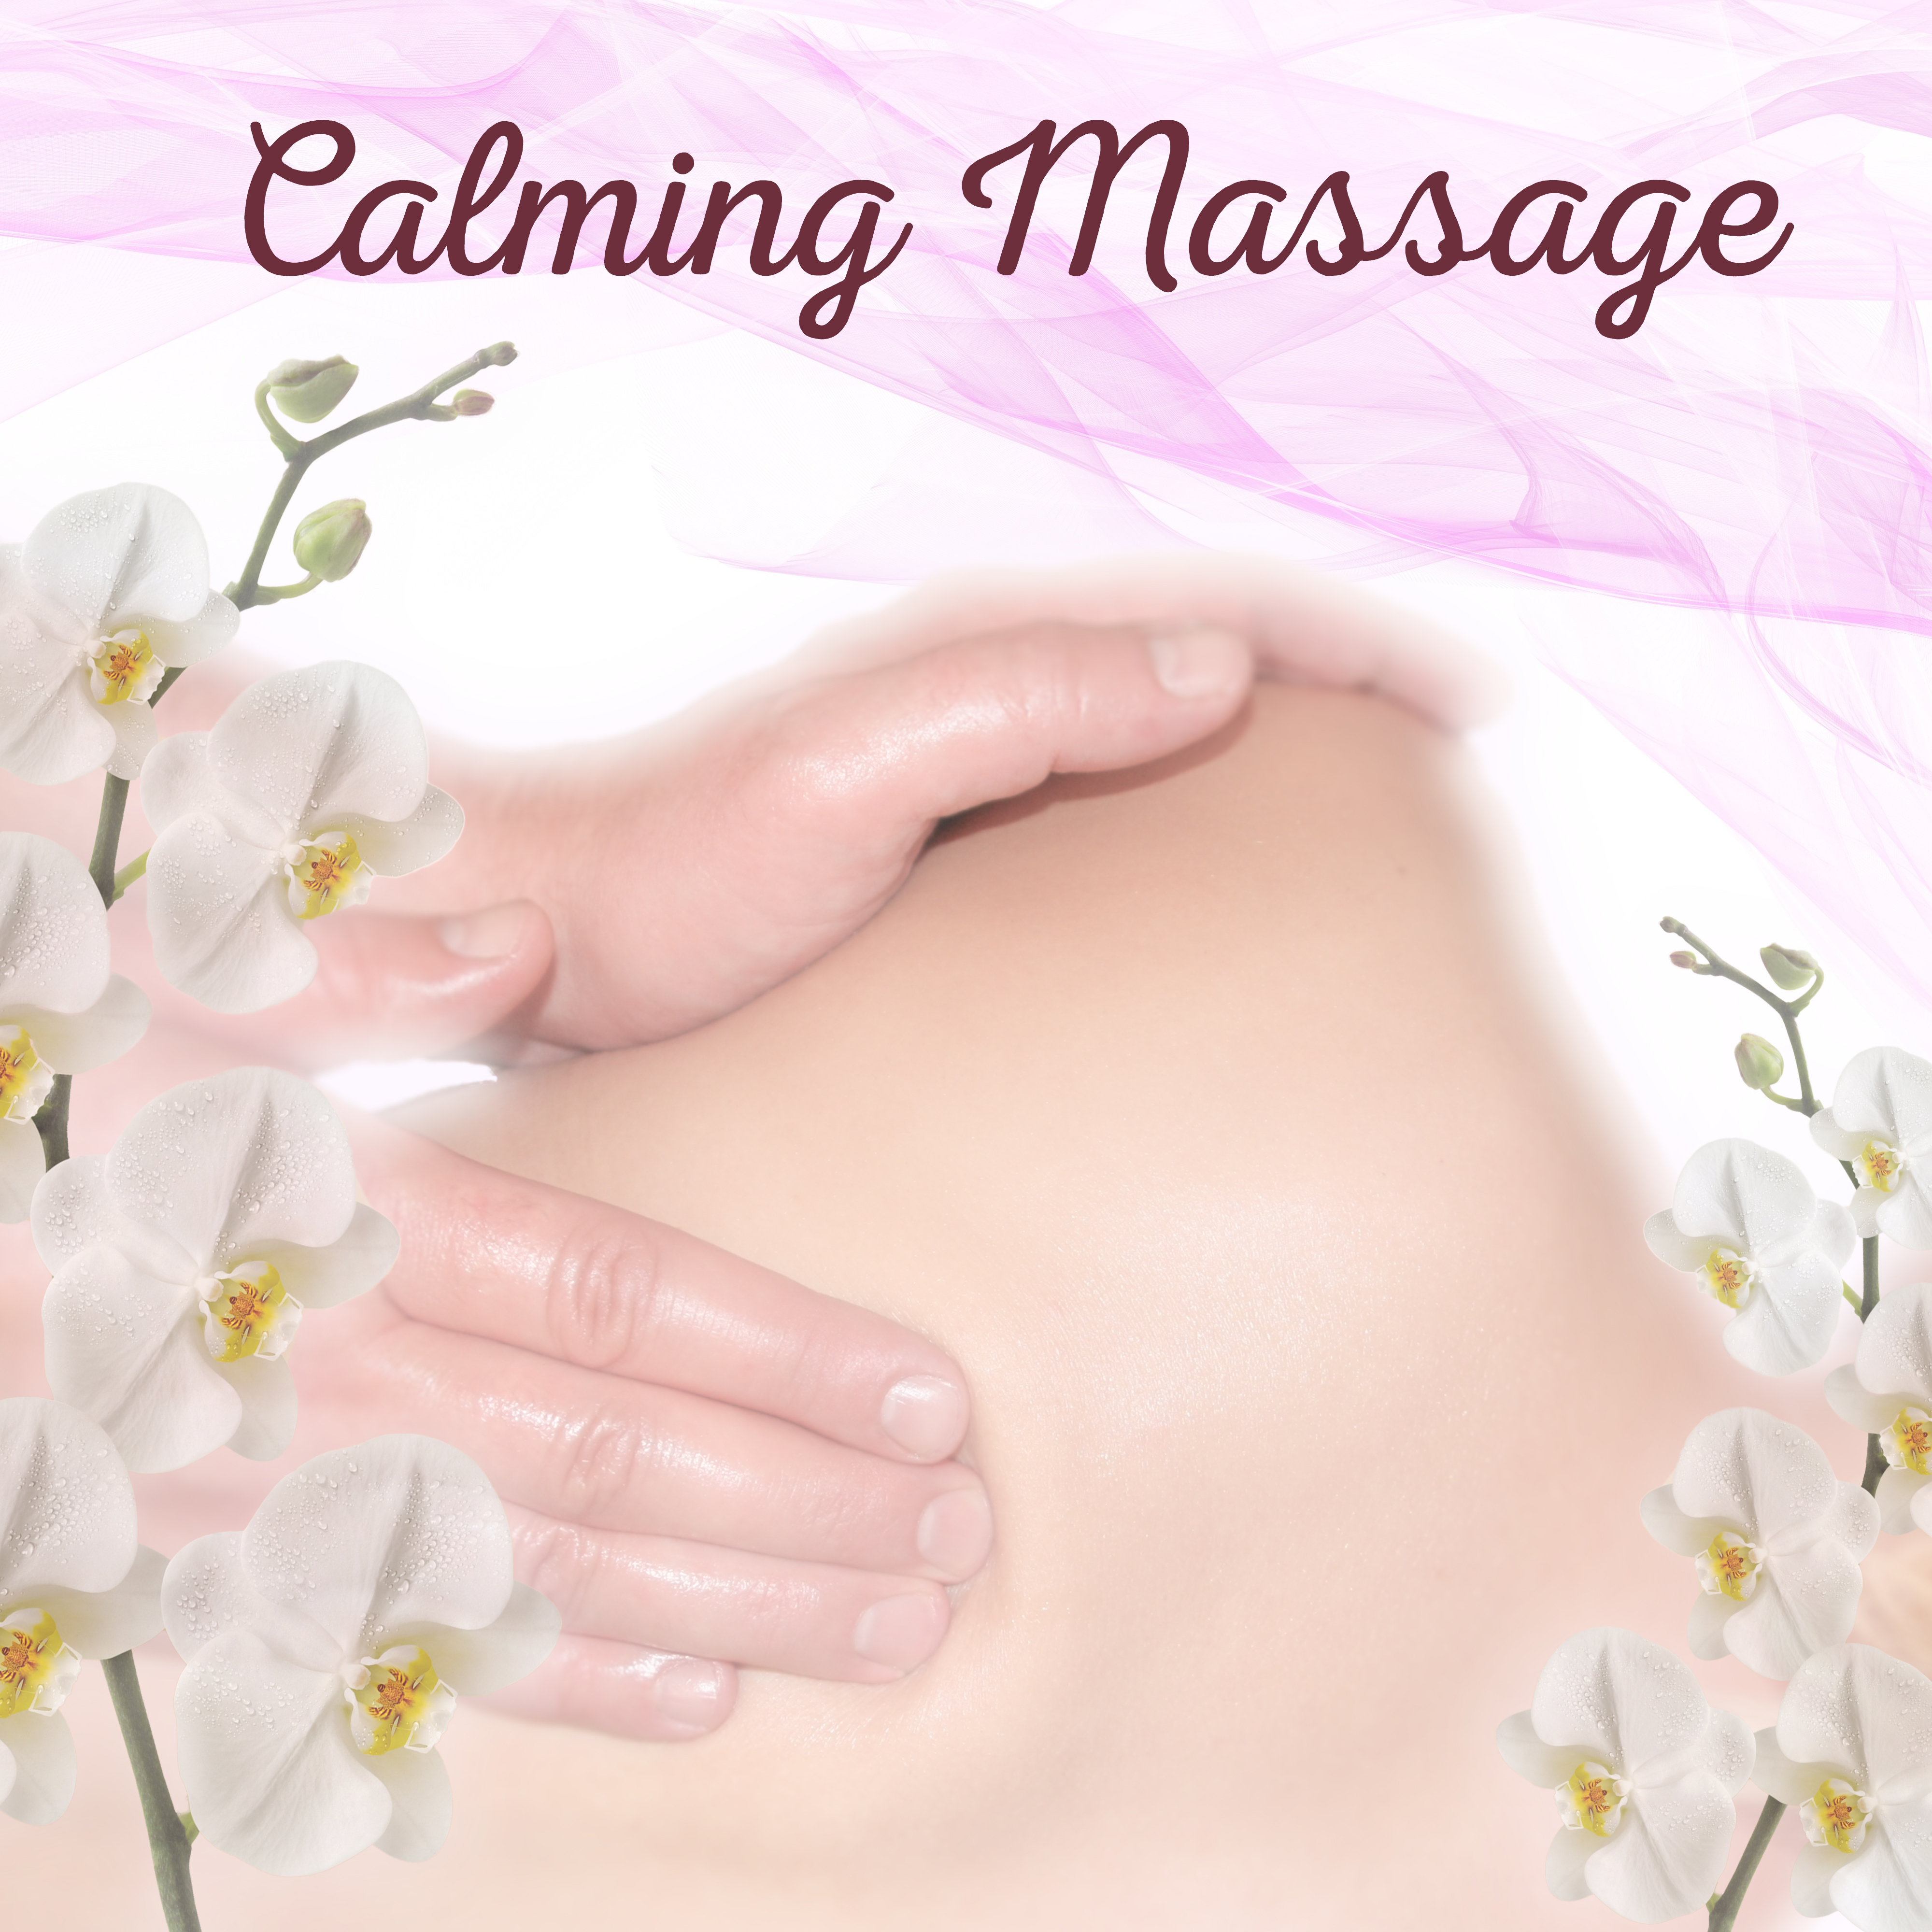 Calming Massage  Soft New Age Music for Relax, Spa, Massage, full of Nature Sounds, Healing Music